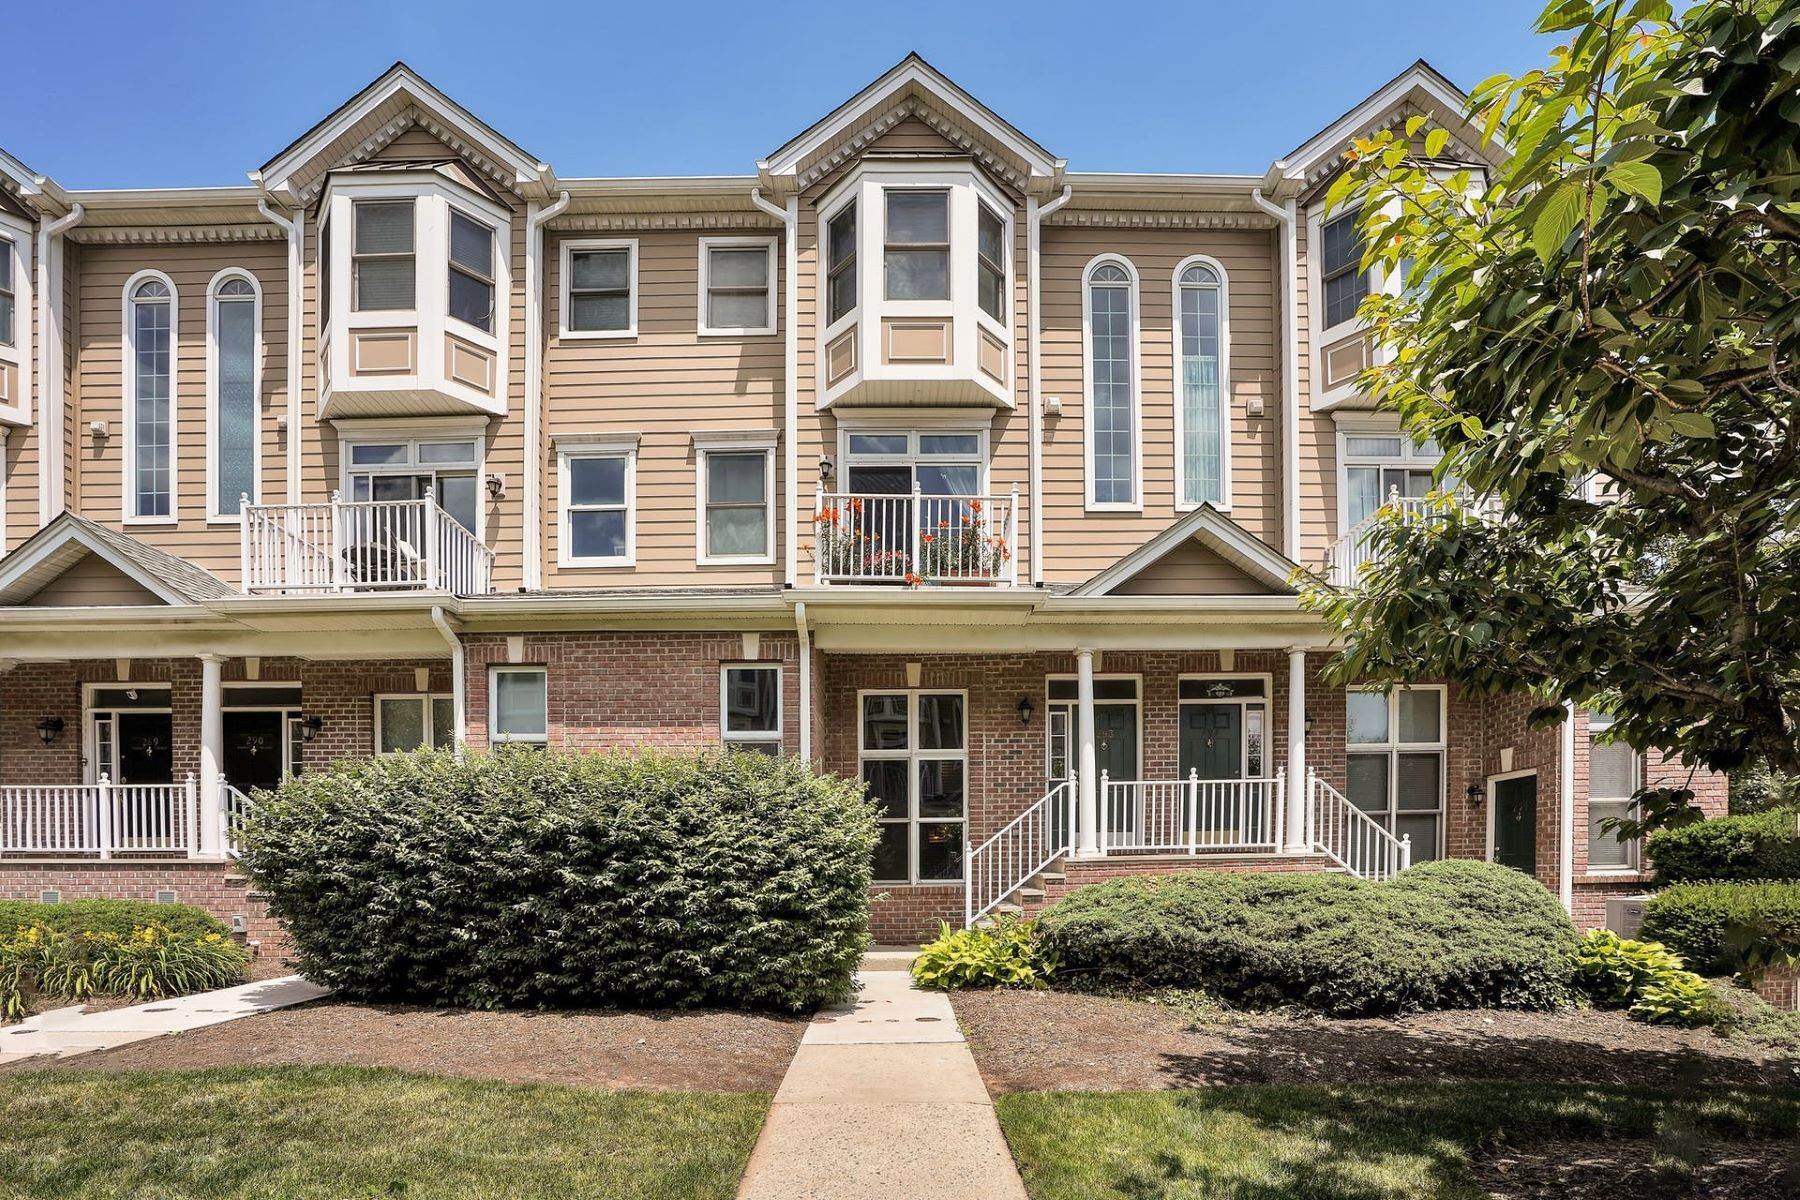 Townhouse at Lavish and visually stunning, this 3BD/2BA townhome accentuates a suburban feel 292 Roslyn Court West New York, New Jersey 07093 United States